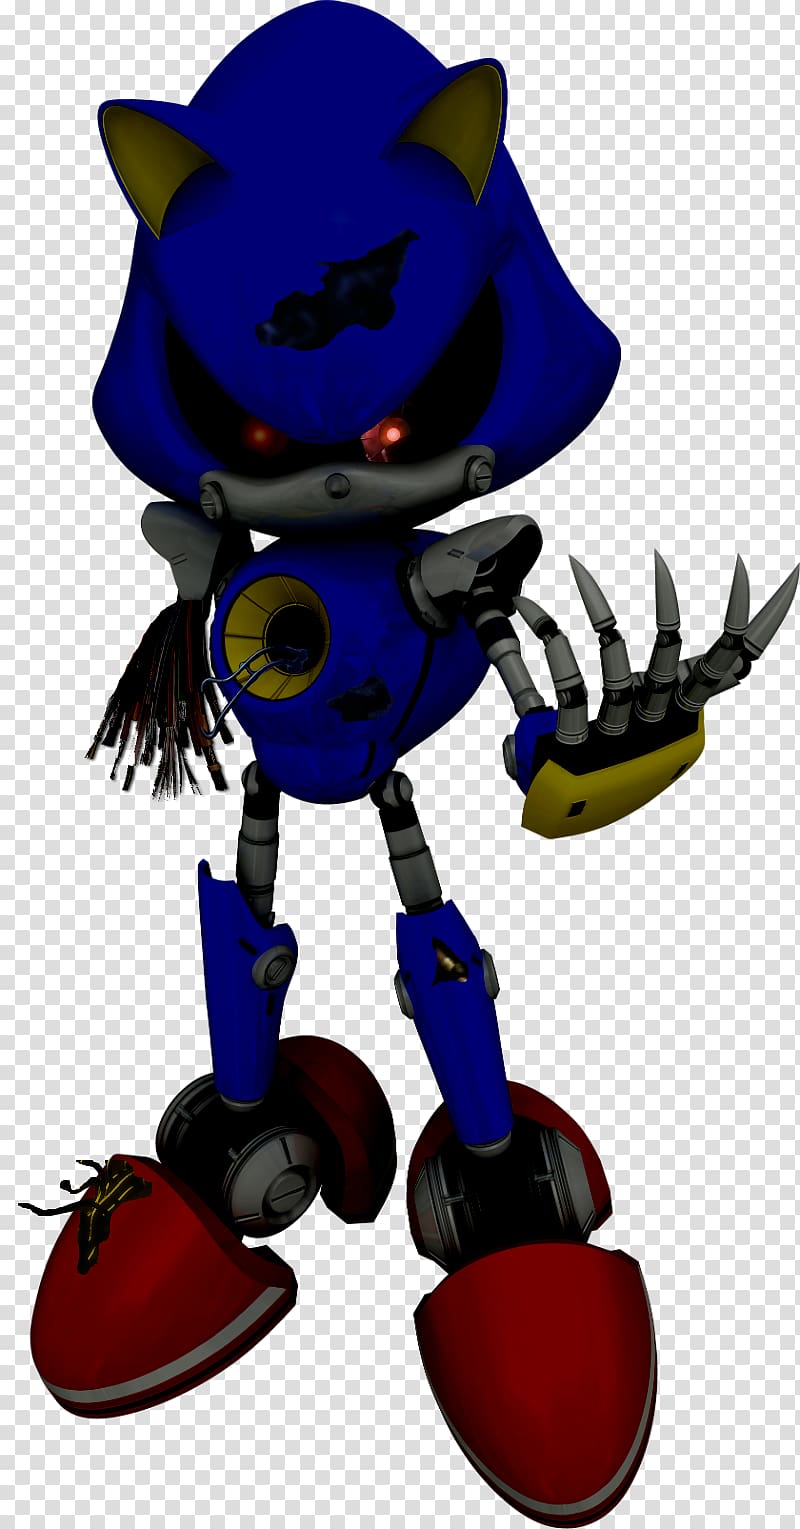 Five Nights at Freddy's 4 Five Nights at Freddy's 2 Metal Sonic Sonic the Hedgehog 3 Sonic CD, others transparent background PNG clipart